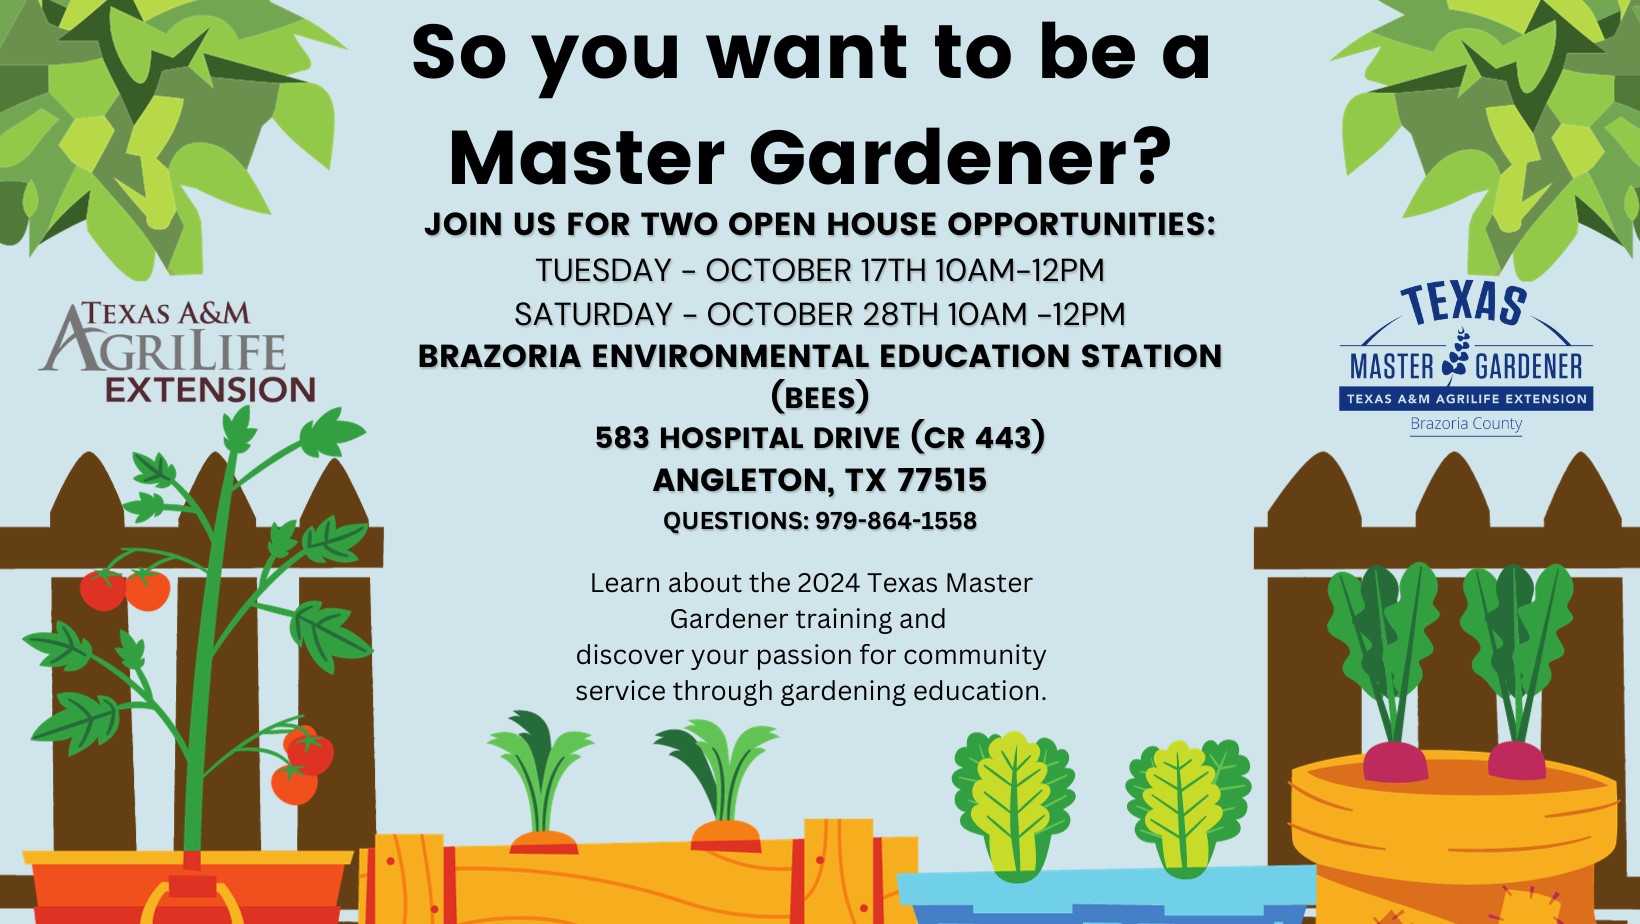 Master Gardener Intern Open House offers two options to learn more about the Brazoria County Master Gardener program.